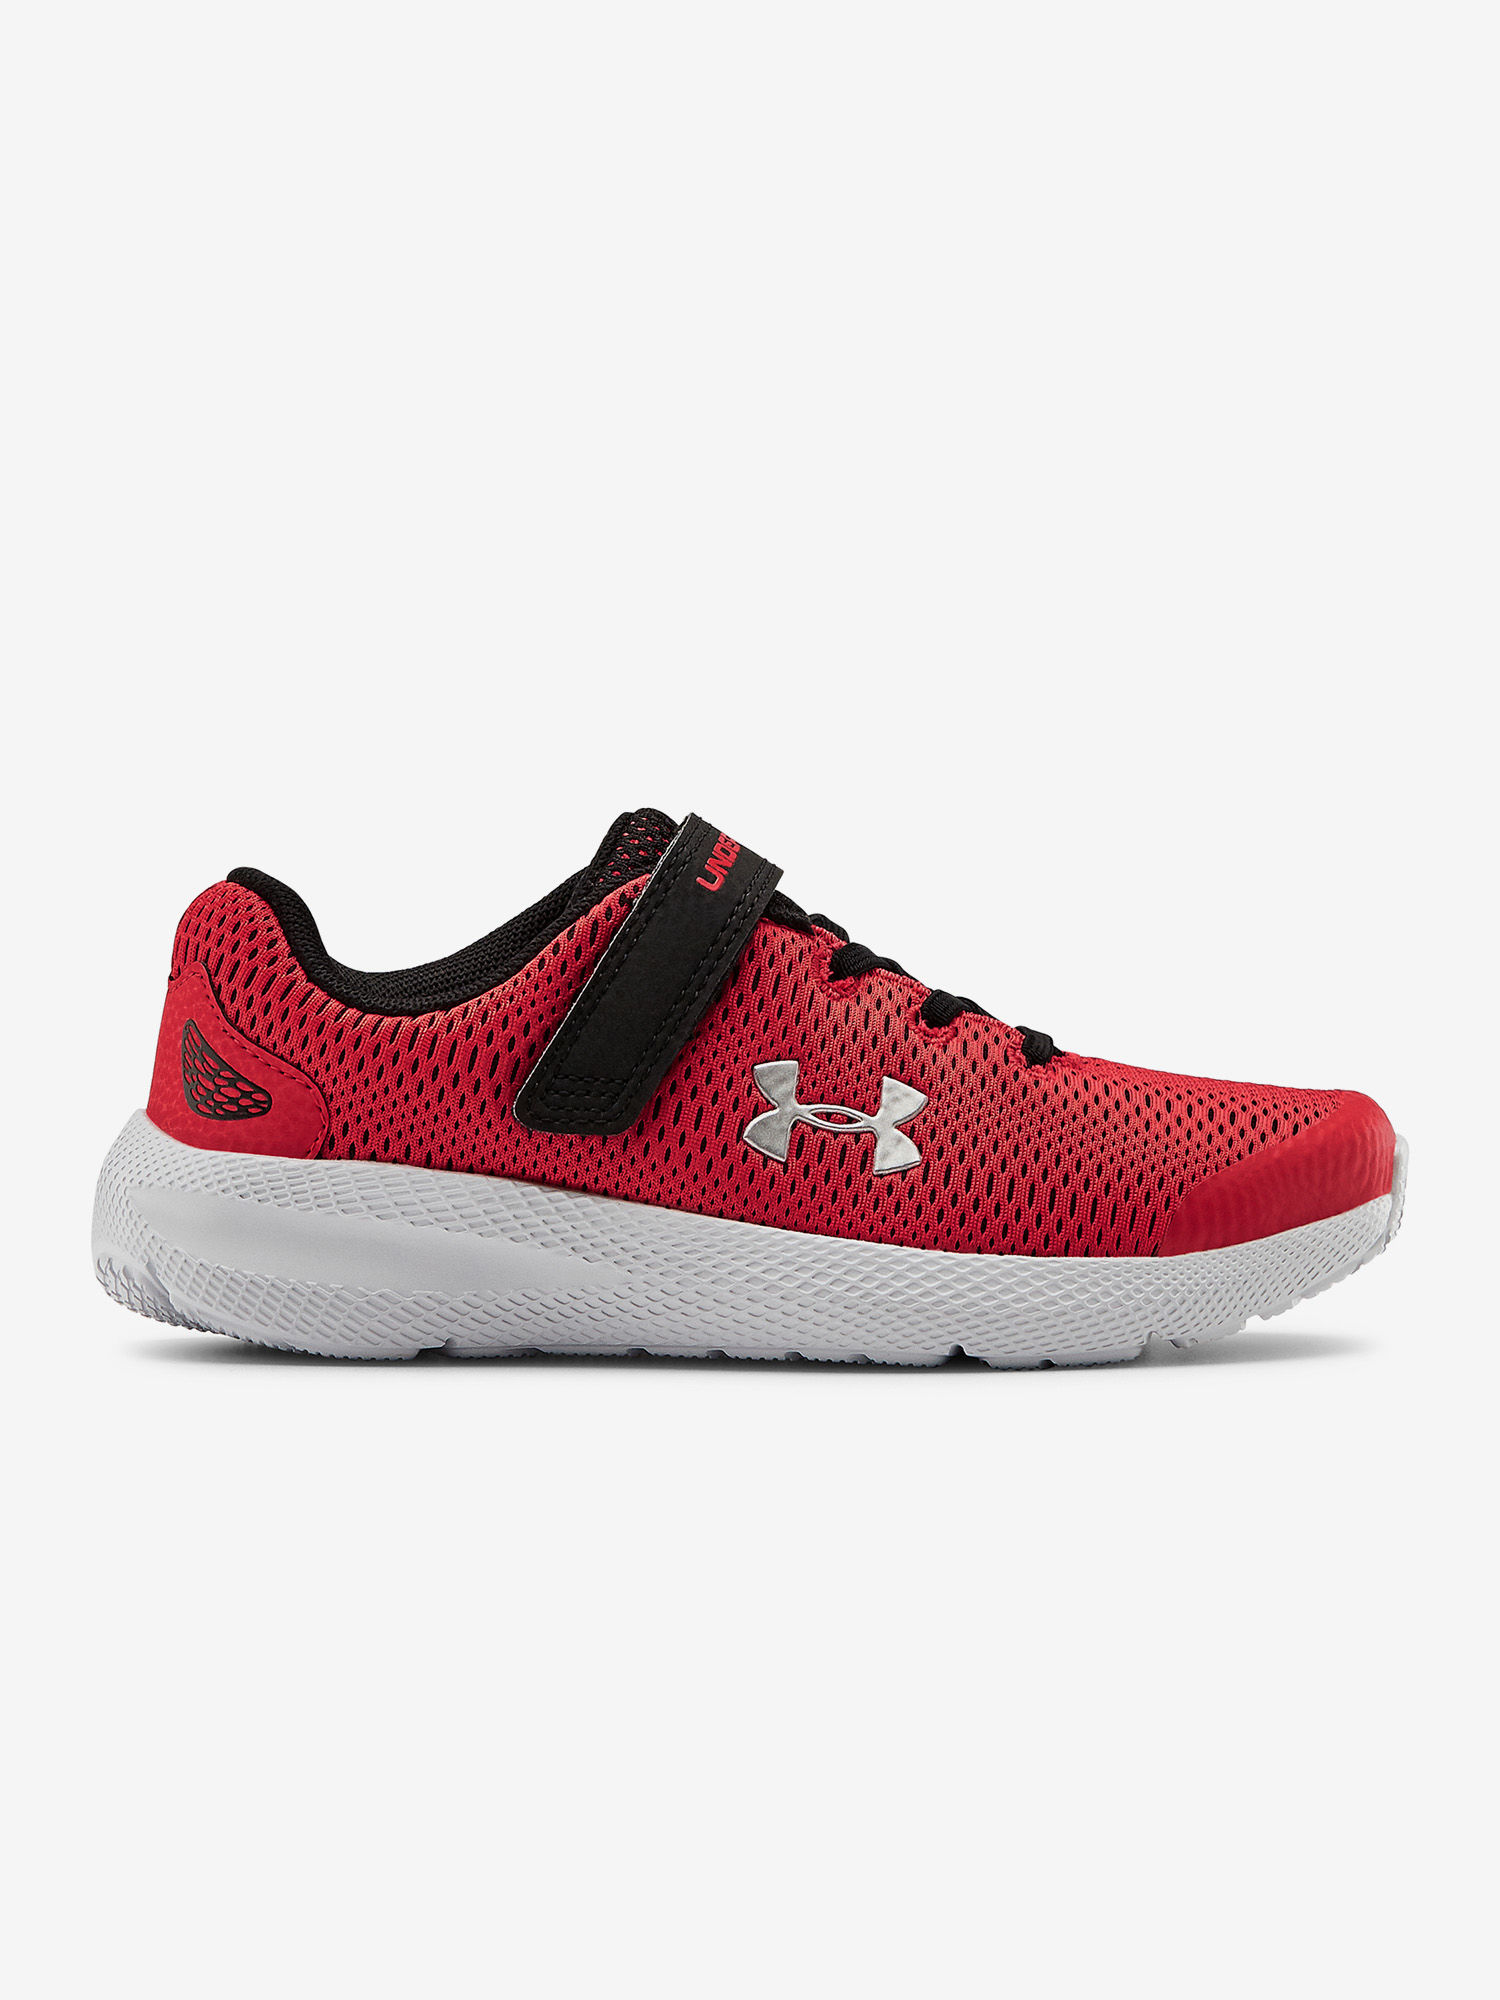 Boty Under Armour PS Pursuit 2 AC-RED (1)